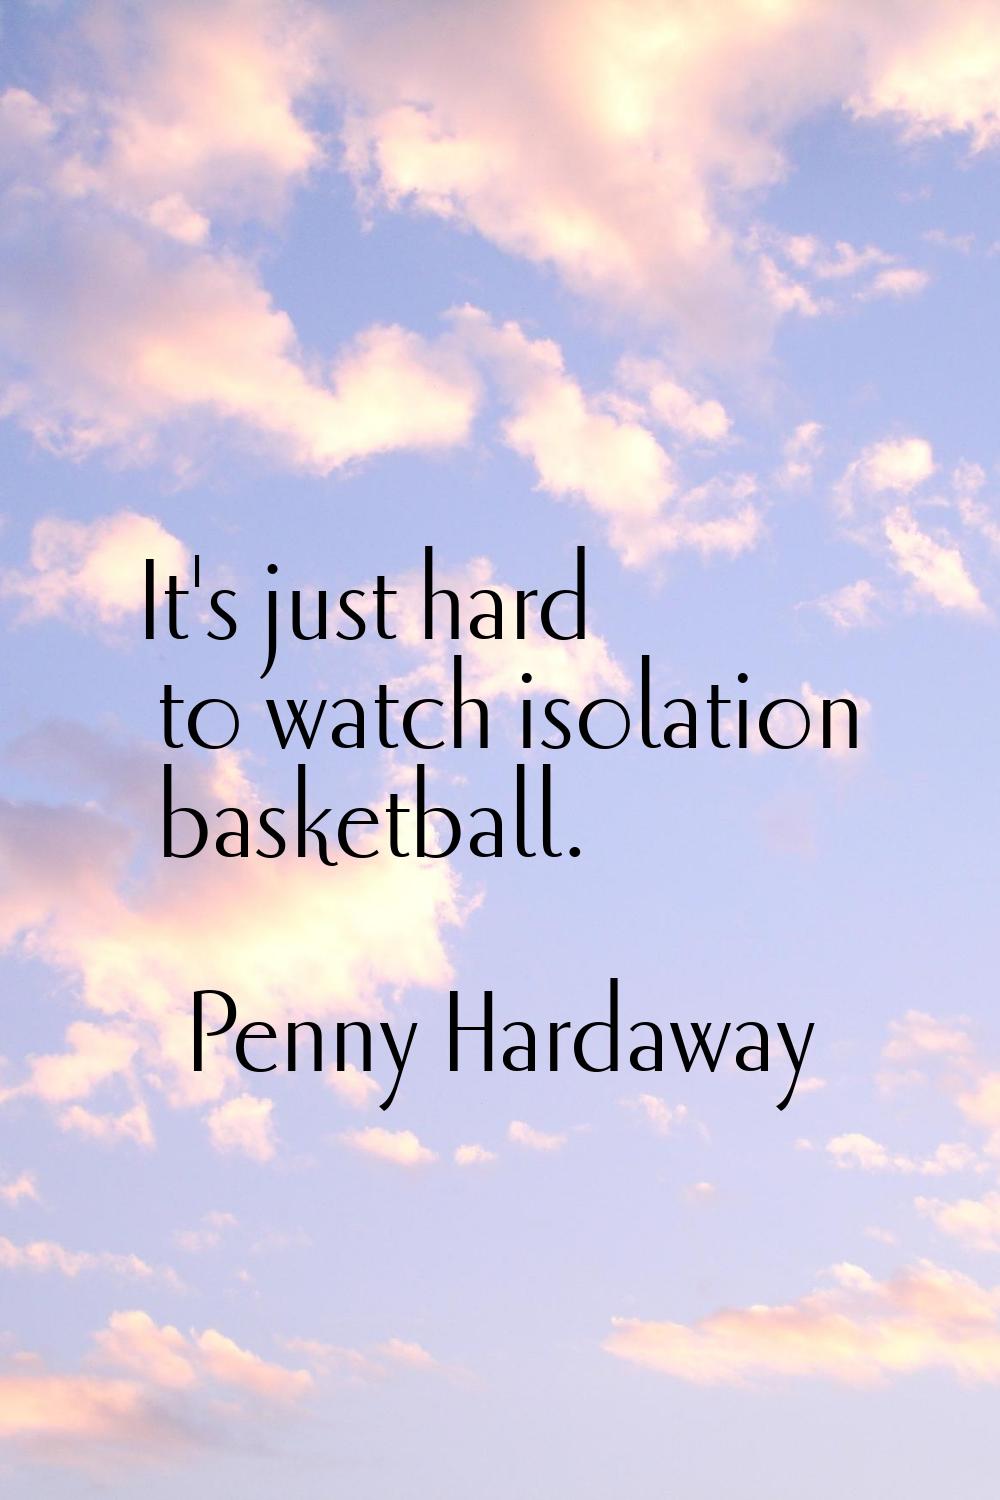 It's just hard to watch isolation basketball.